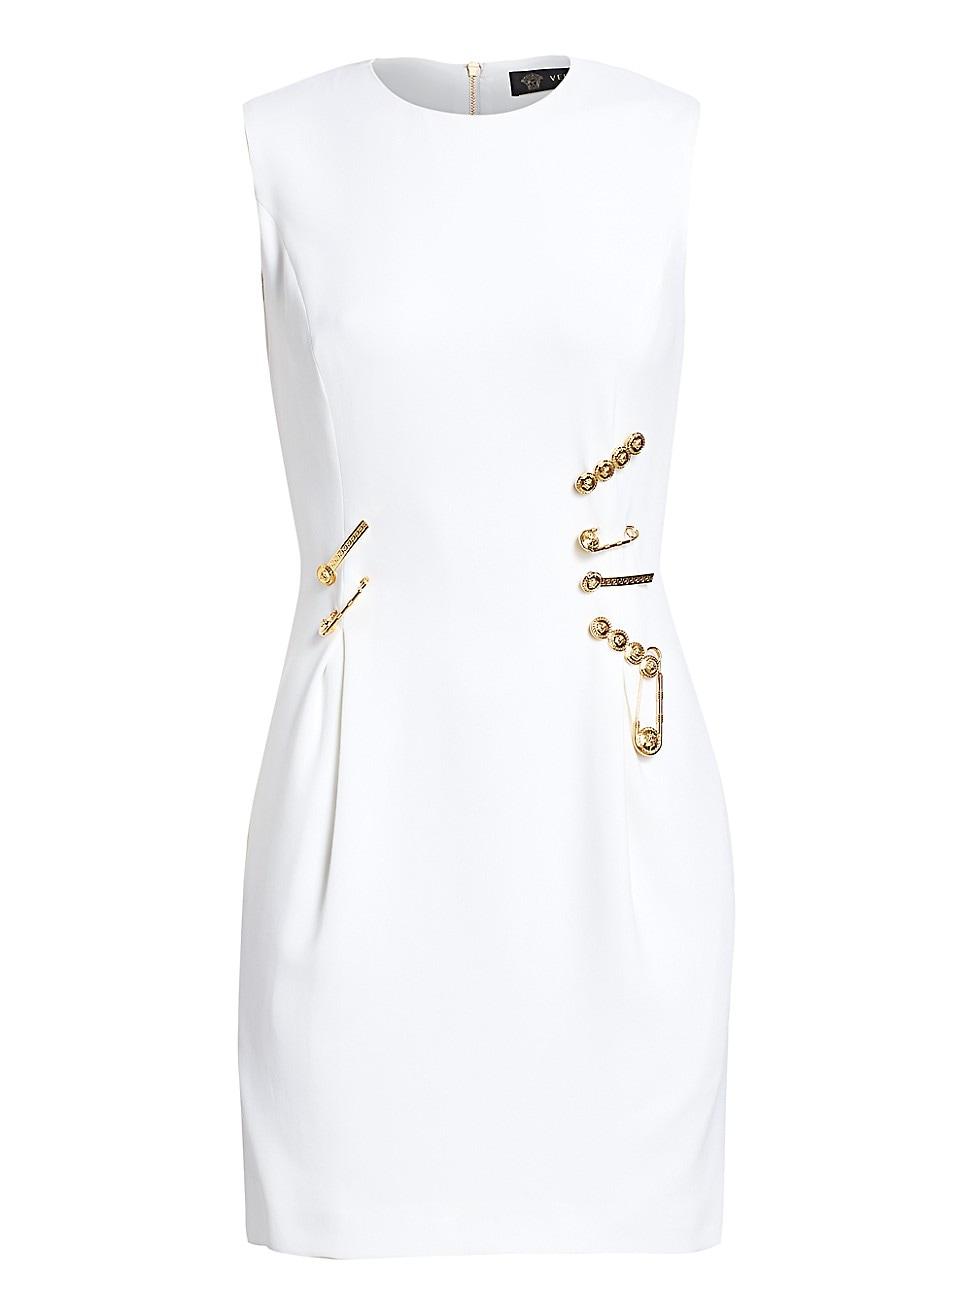 Versace Safety Pin Mini Dress in White - Lyst